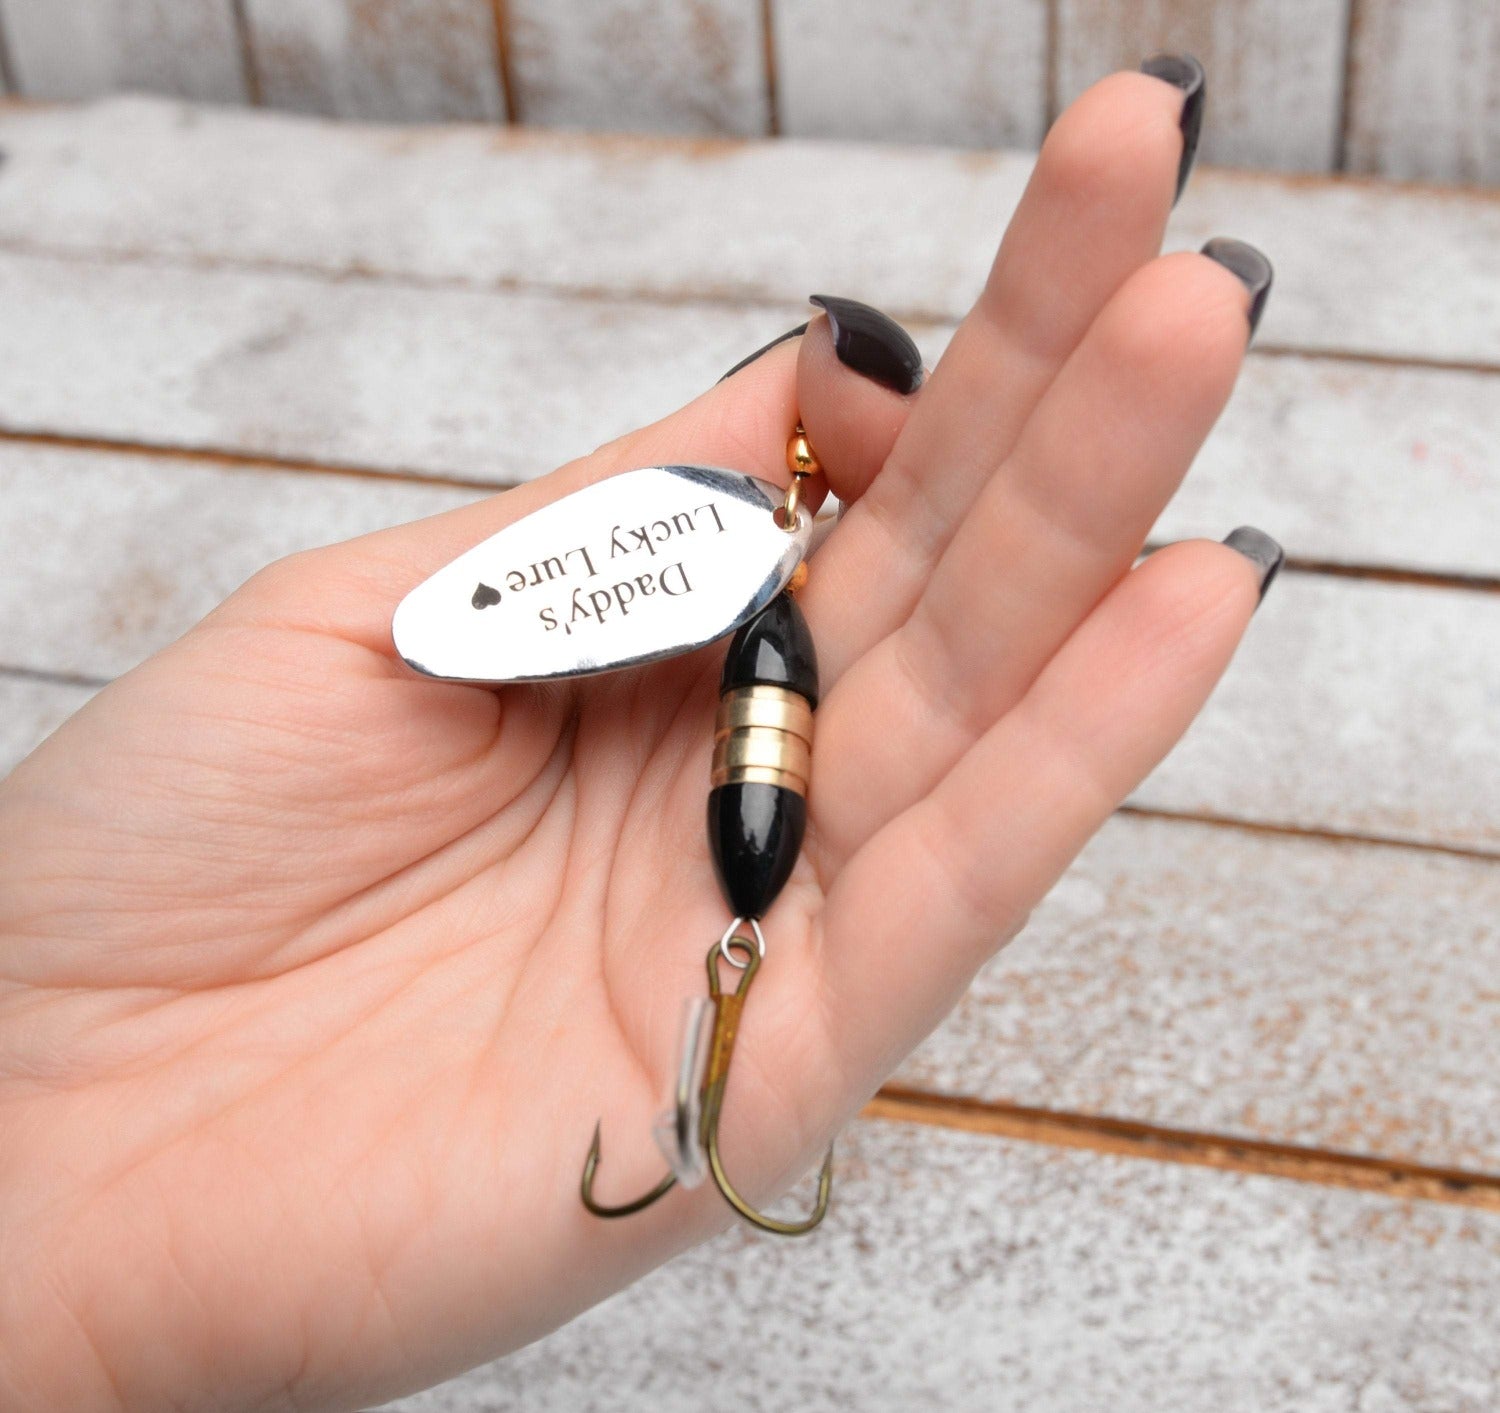 Personalized Fishing gift Lure Set gift for Dad Custom Fishing